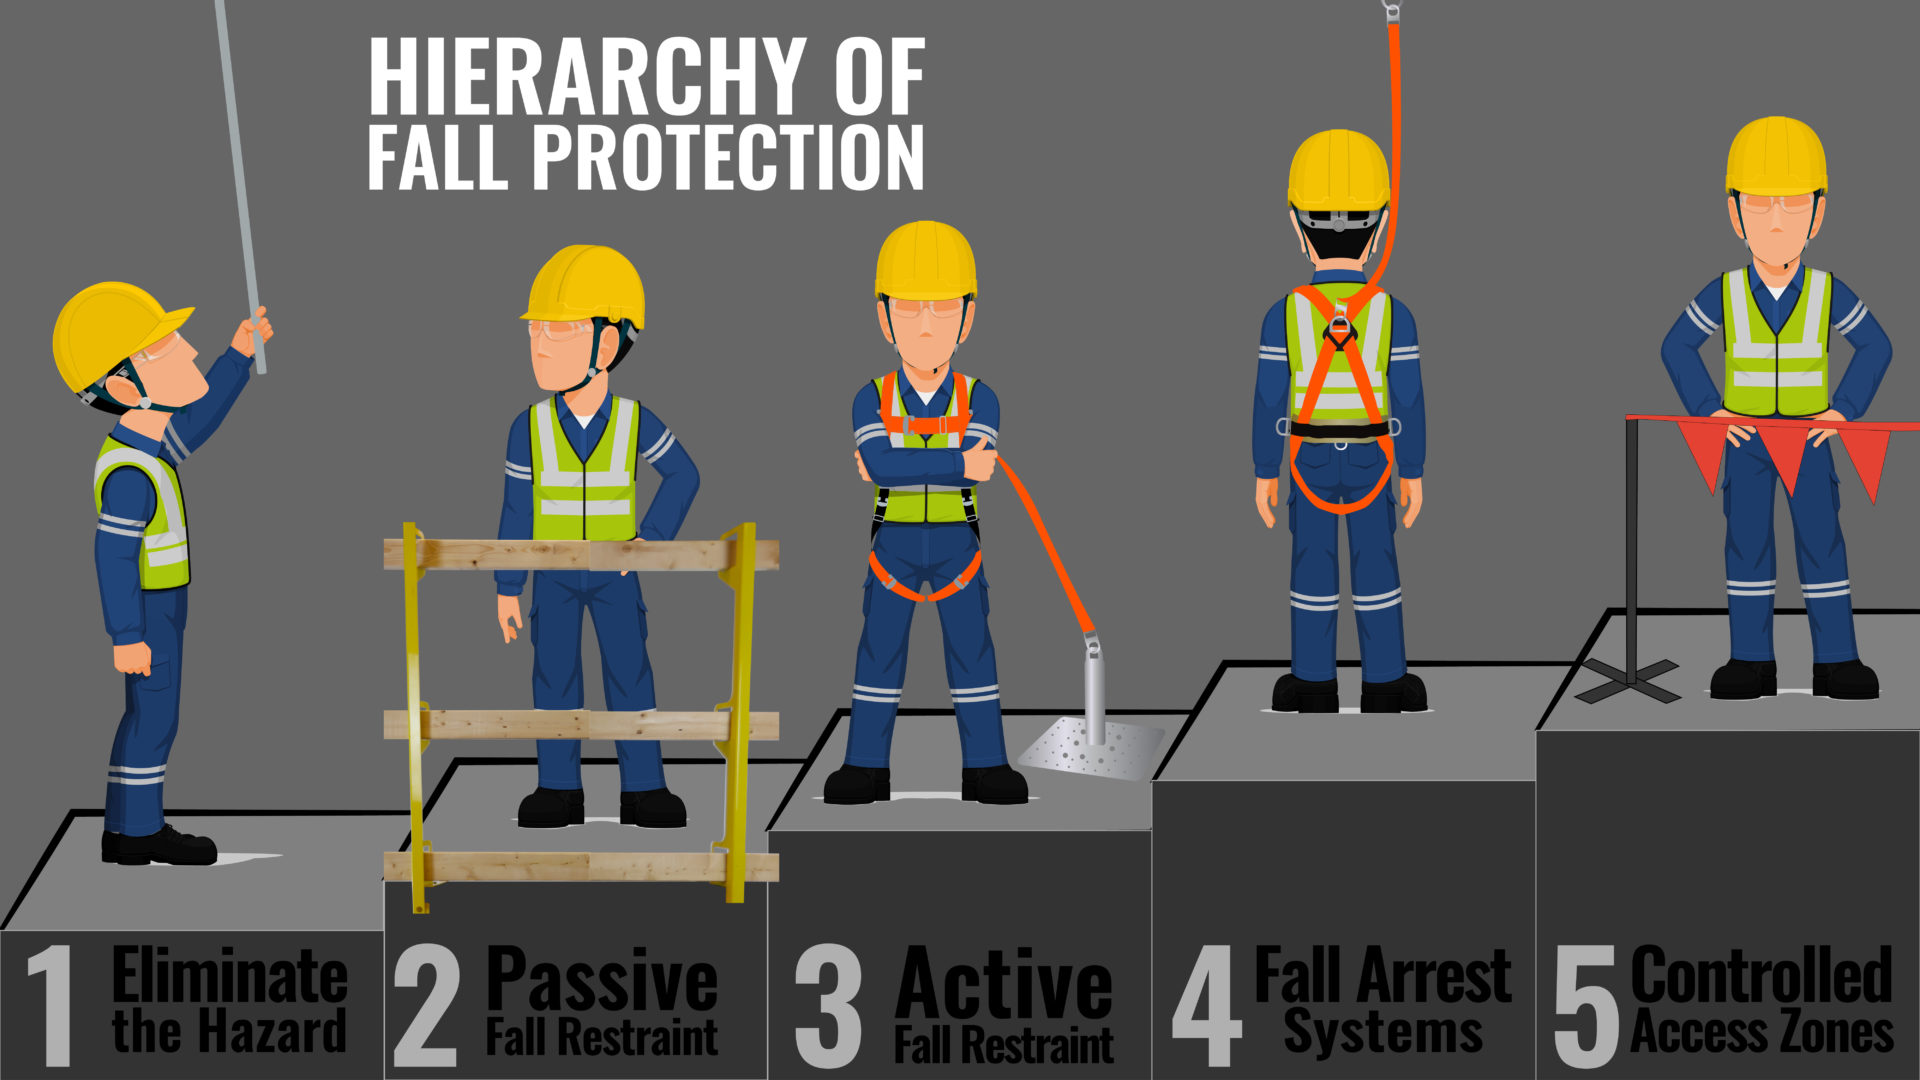 Why is it better to work in fall restraint than fall arrest? | Malta ...